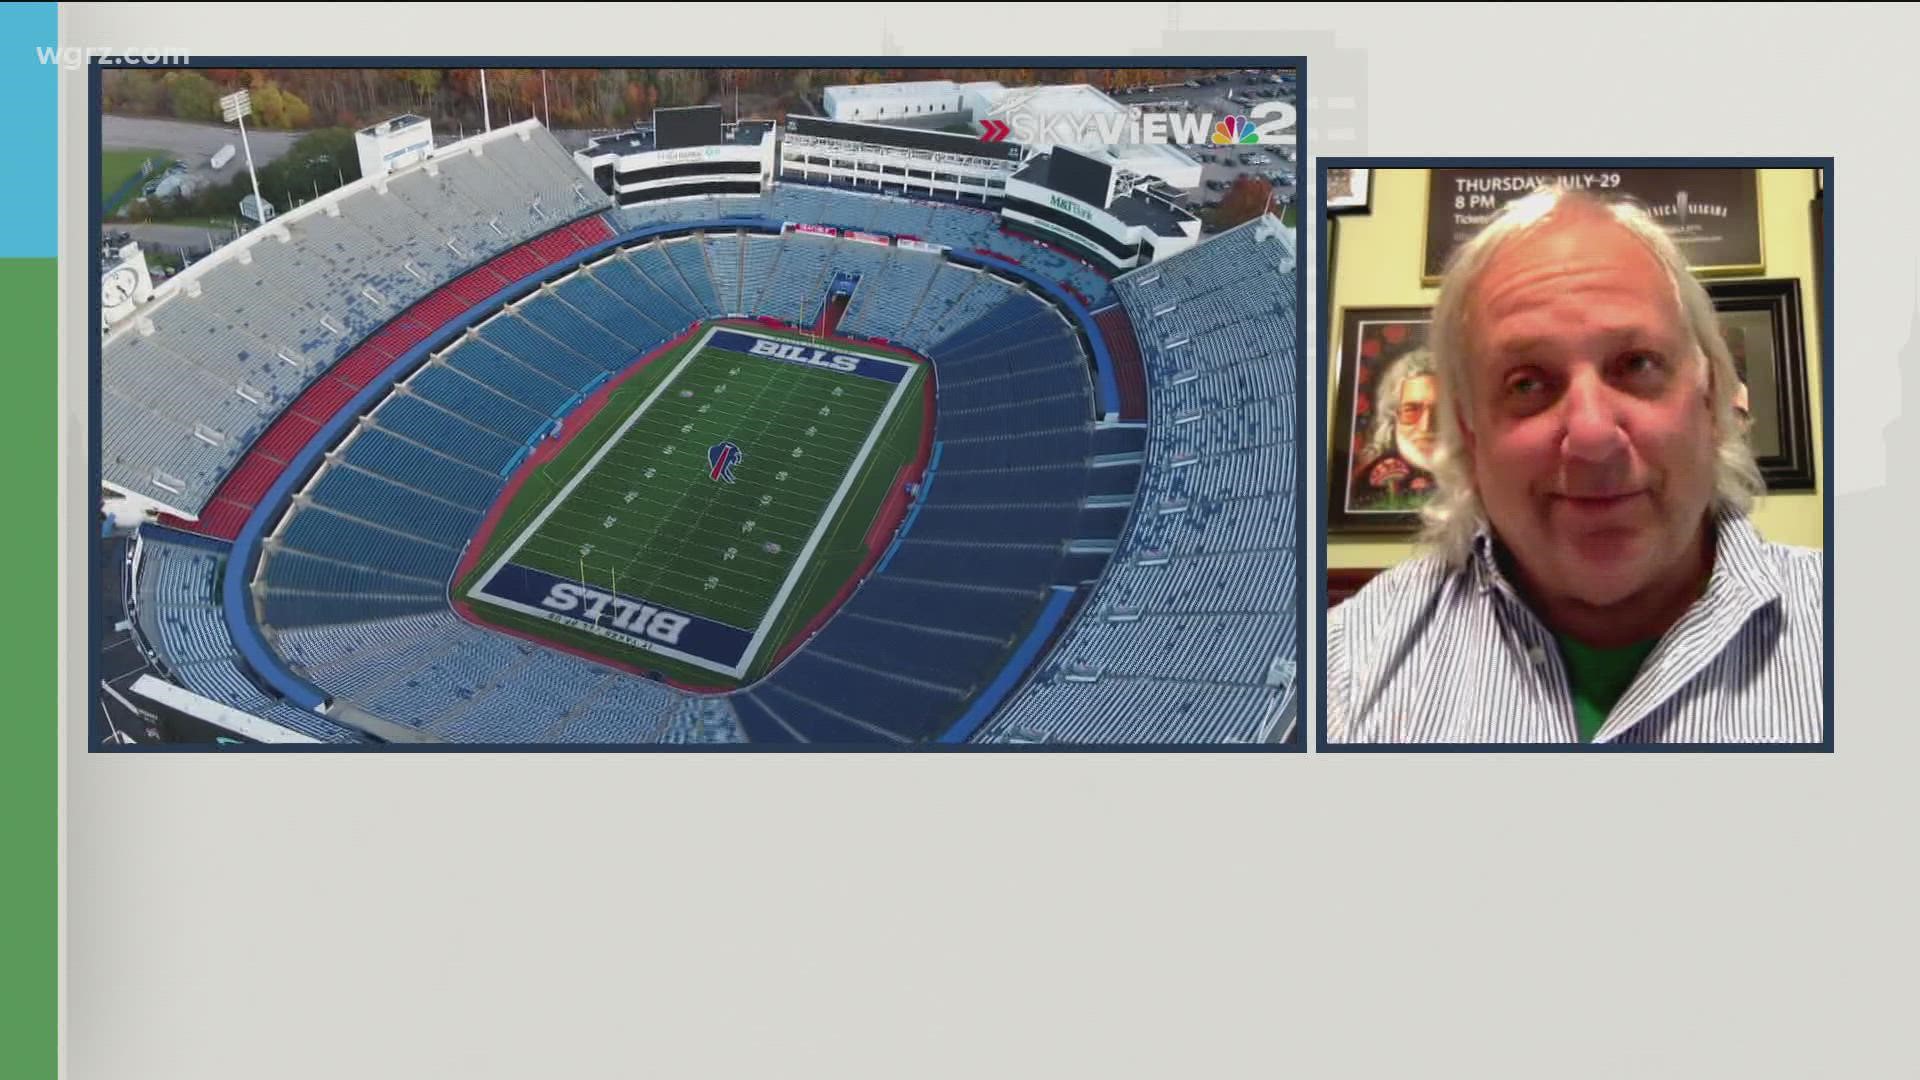 Buffalo Business First reporter Jim Fink discusses the timeline for construction of the new stadium in Orchard Park.